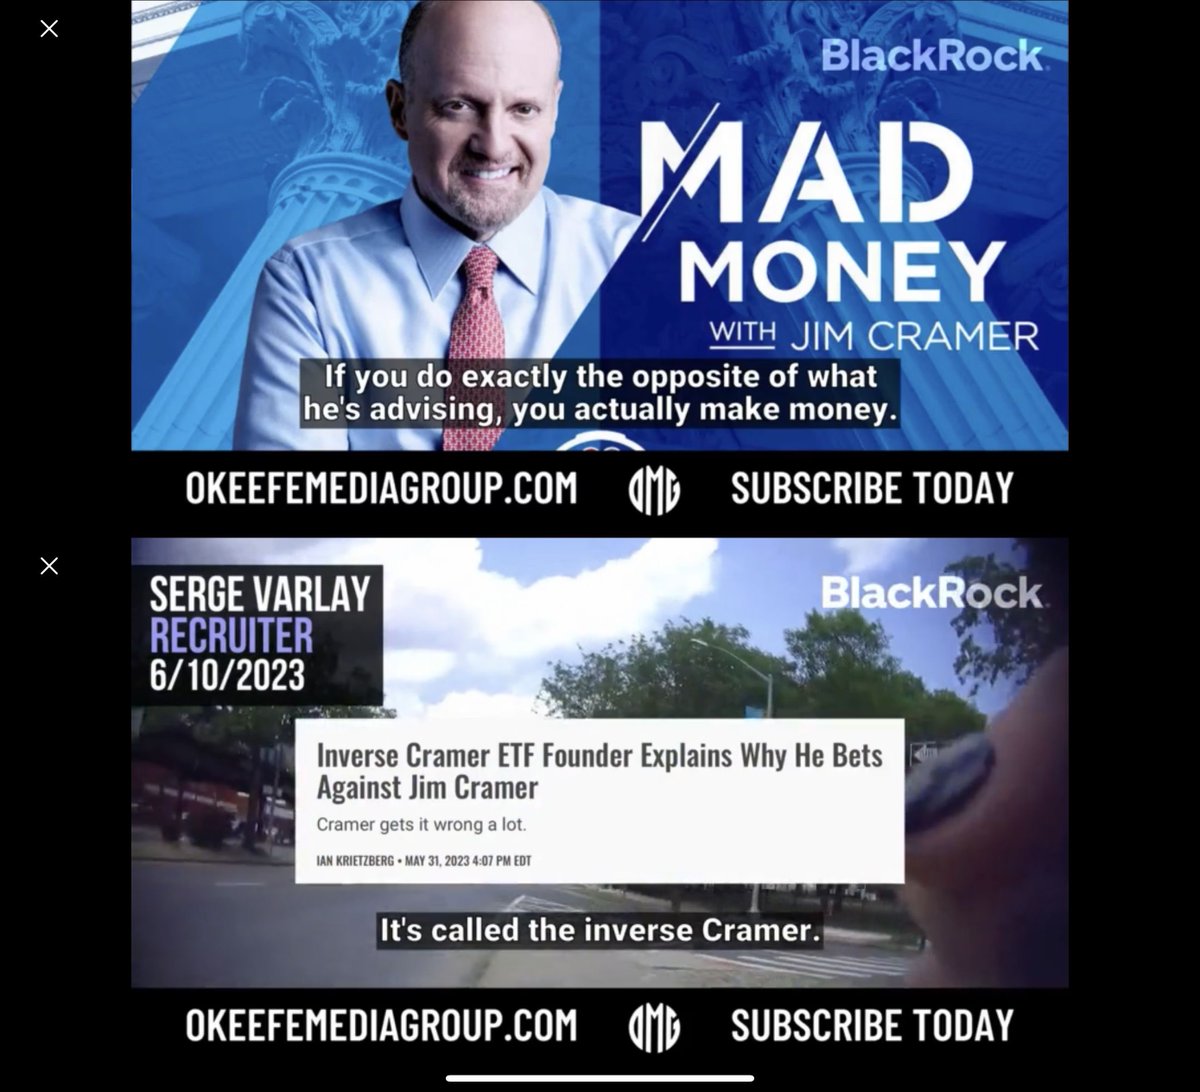 Hey @jimcramer is this you? BlackRock recruiter names you directly as working for the elite and purposing telling people to make all the wrong financial moves “If you do the opposite of Jim Cramer you can make money”

If we give “finance advice” it’s prison but they lie & NOTHING